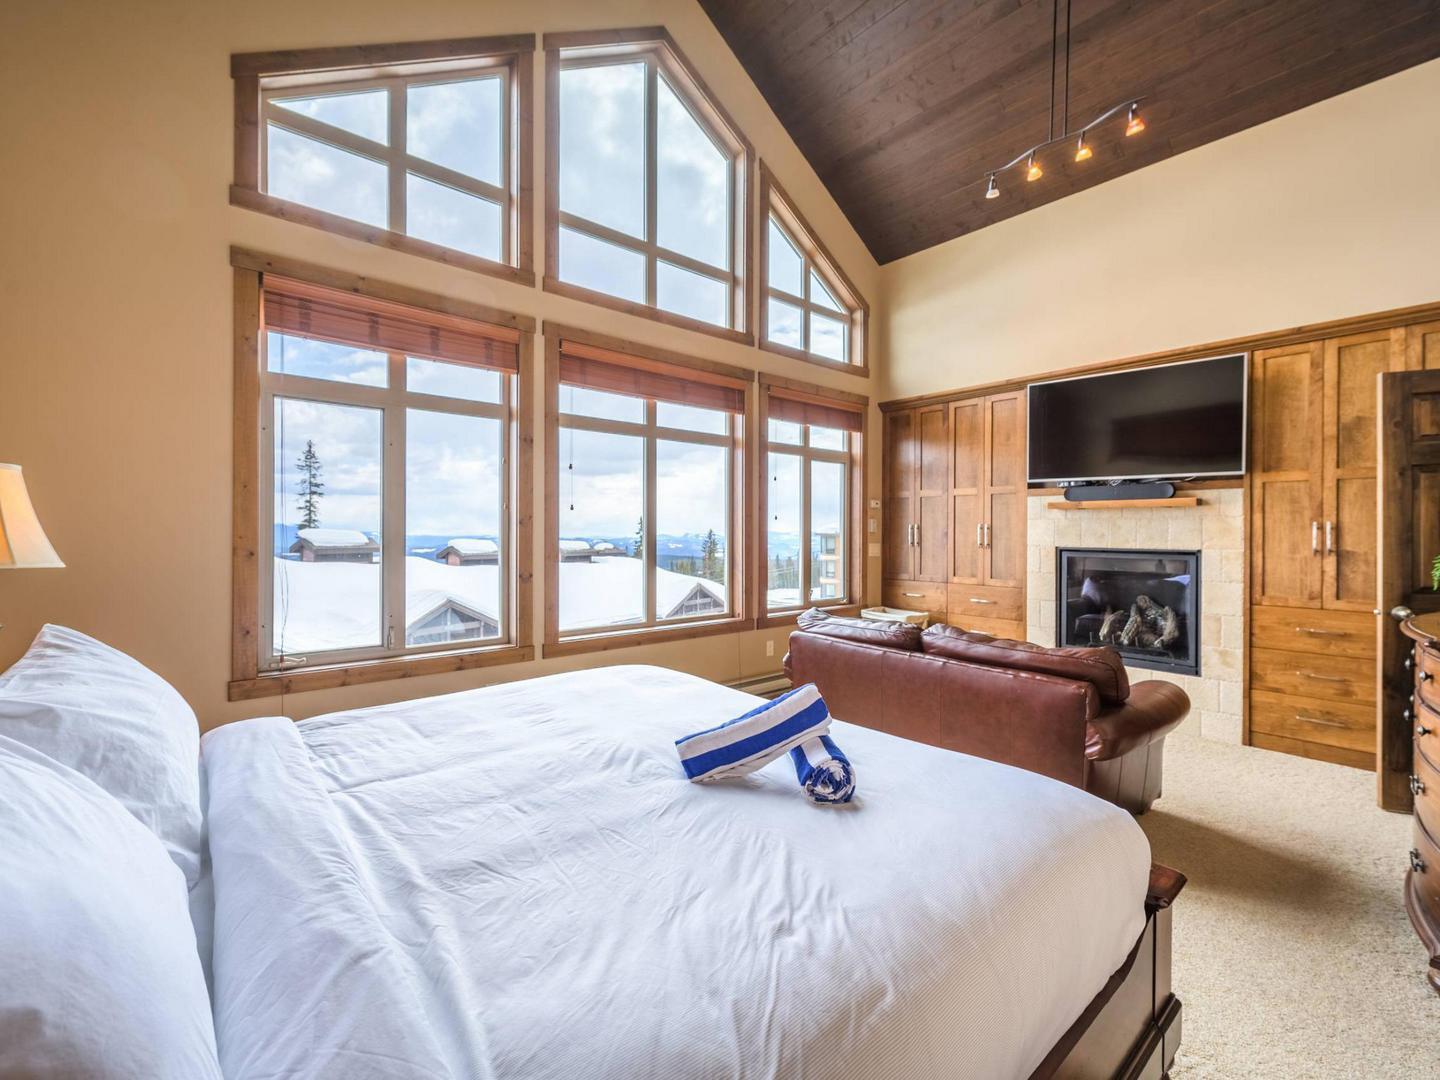 South Point 26 penthouse condo rental's master bedroom with a large cozy bed, a fireplace and floor to ceiling windows, managed by Luxury Mountain Vacation Rentals at Big White Ski Resort.